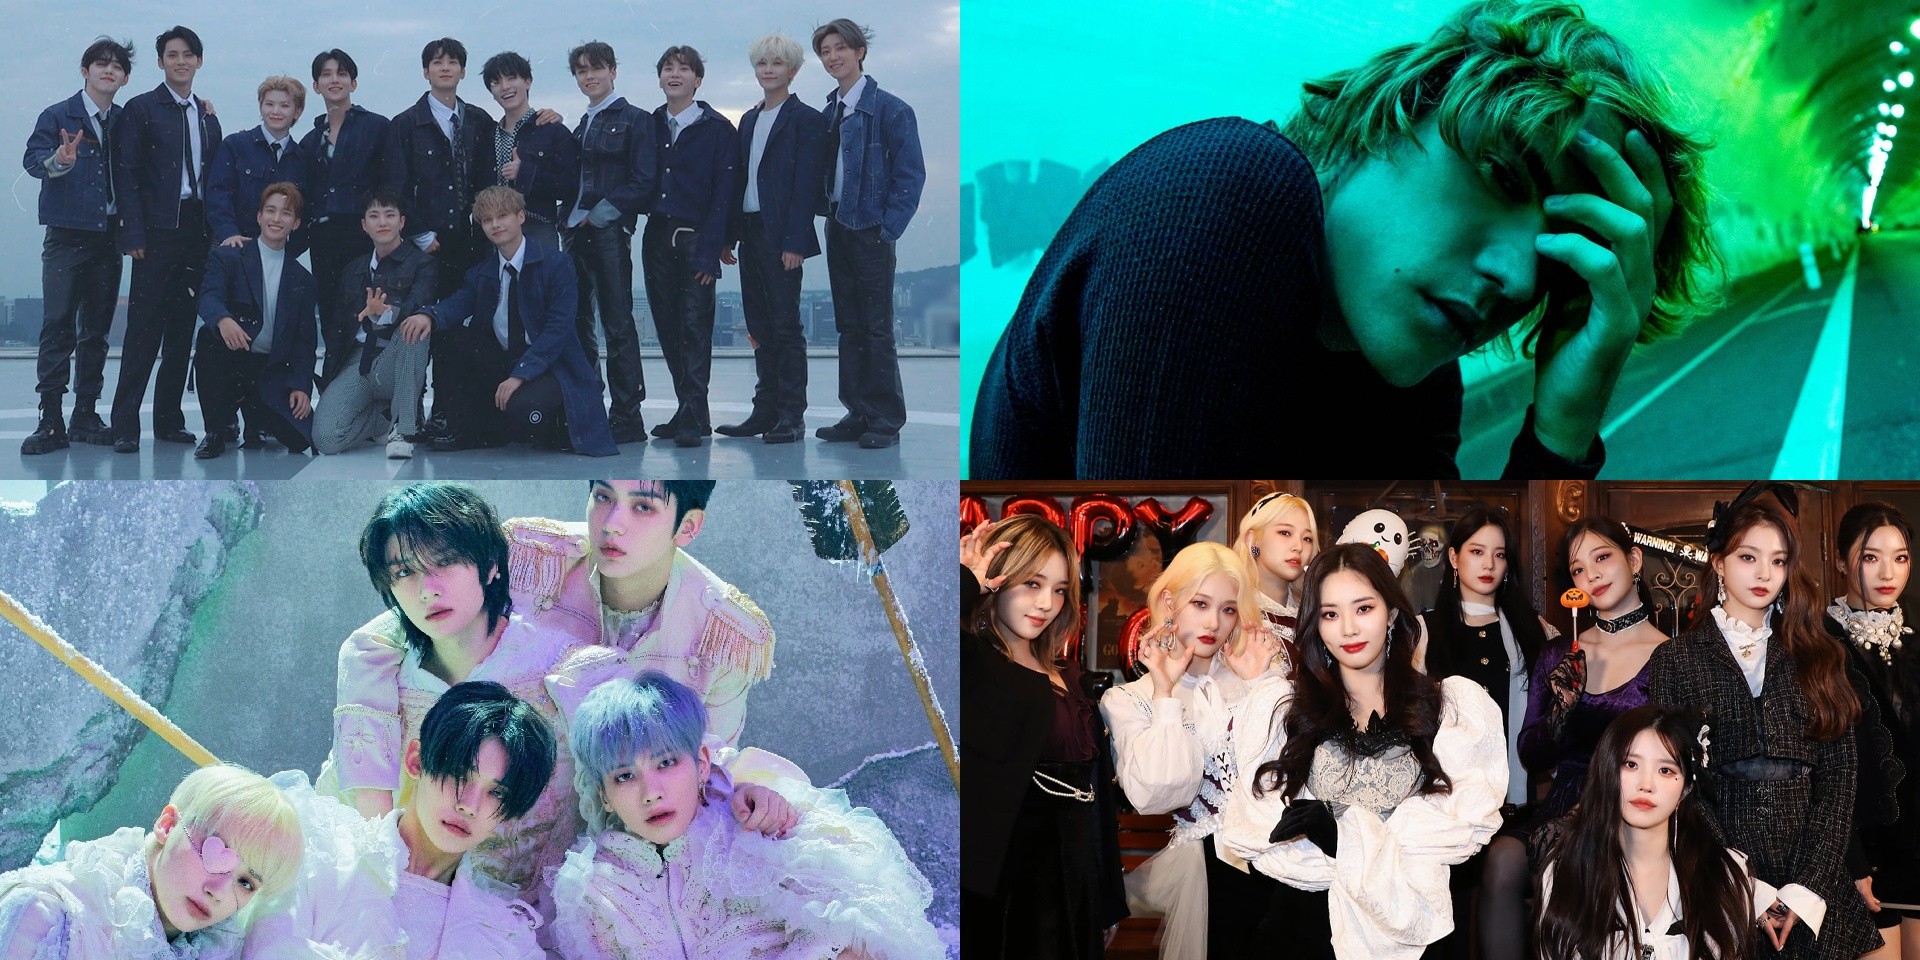 HYBE enter a 'New Era' at 2022 WEVERSE CON with SEVENTEEN, Justin Bieber, TXT, fromis_9, and more